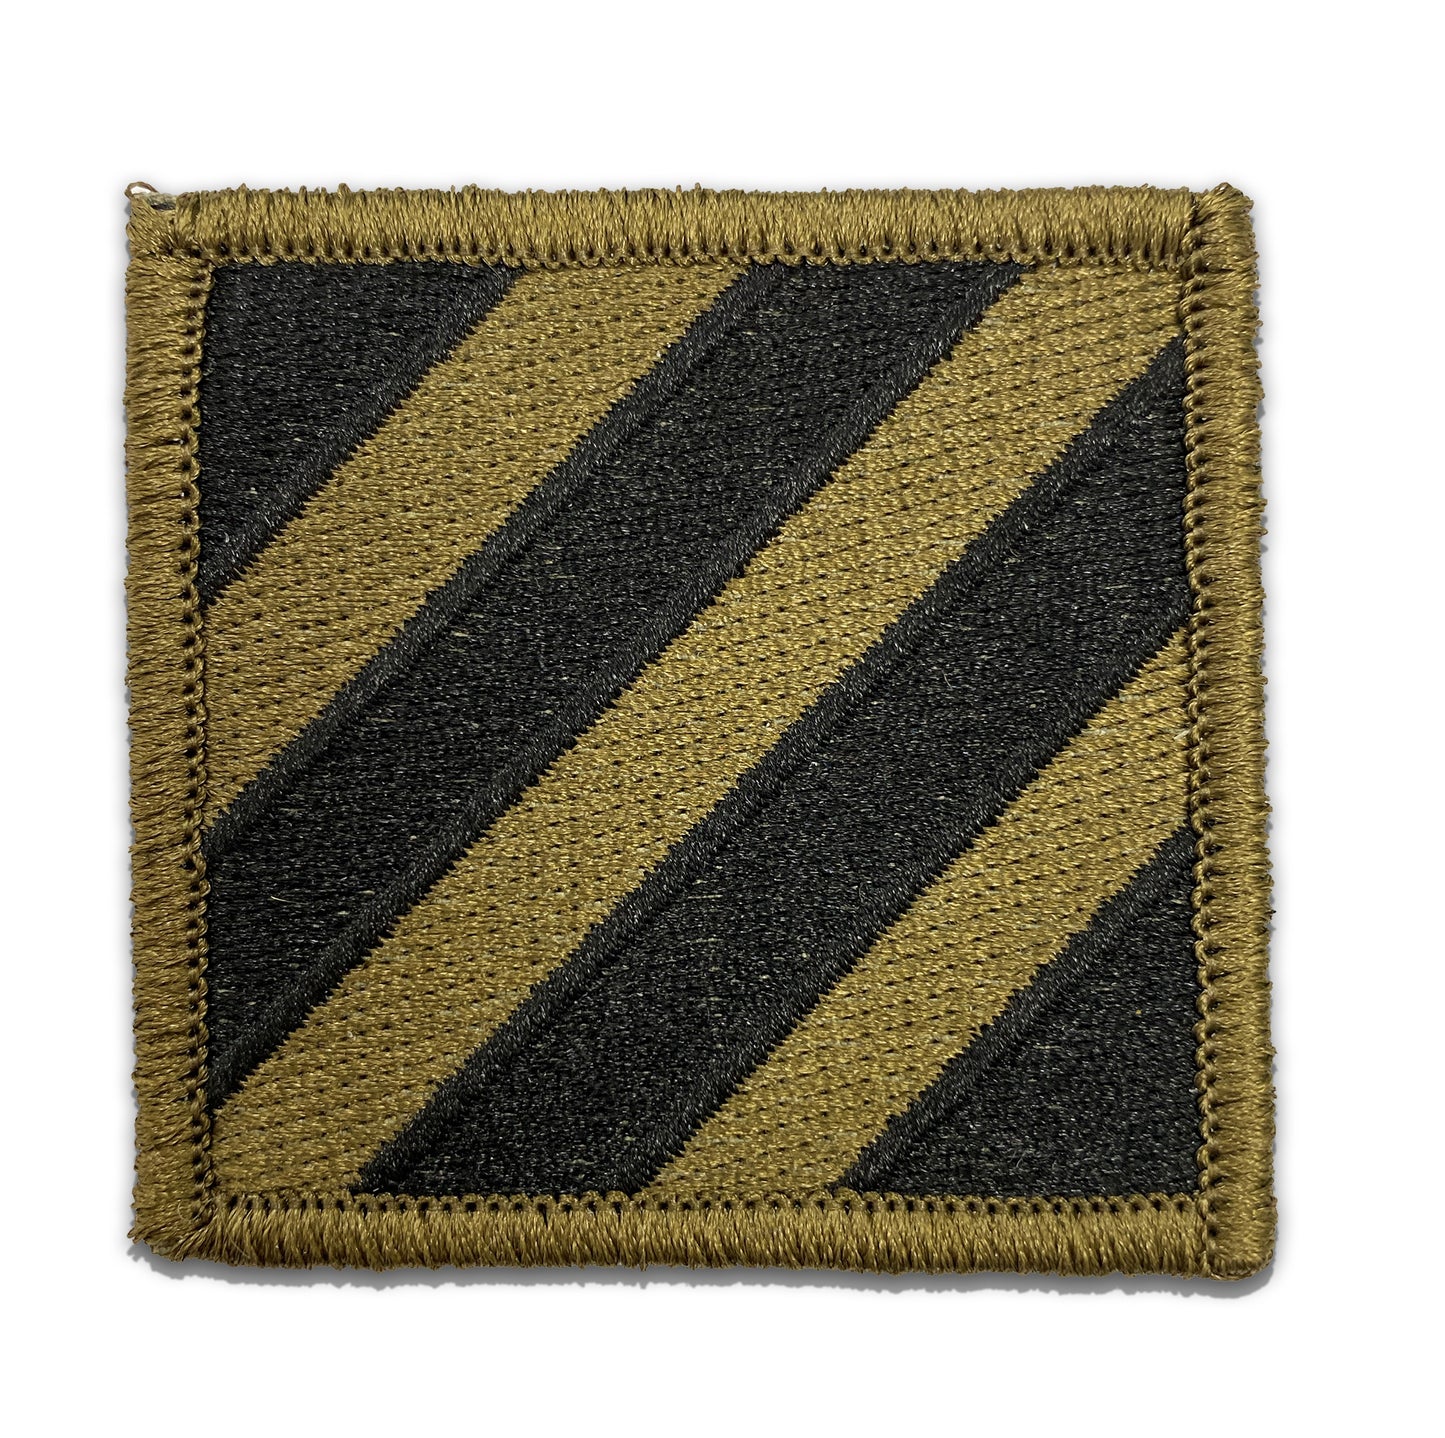 U.S. Army 3rd Infantry Division OCP Patch with Hook Fastener (pair)